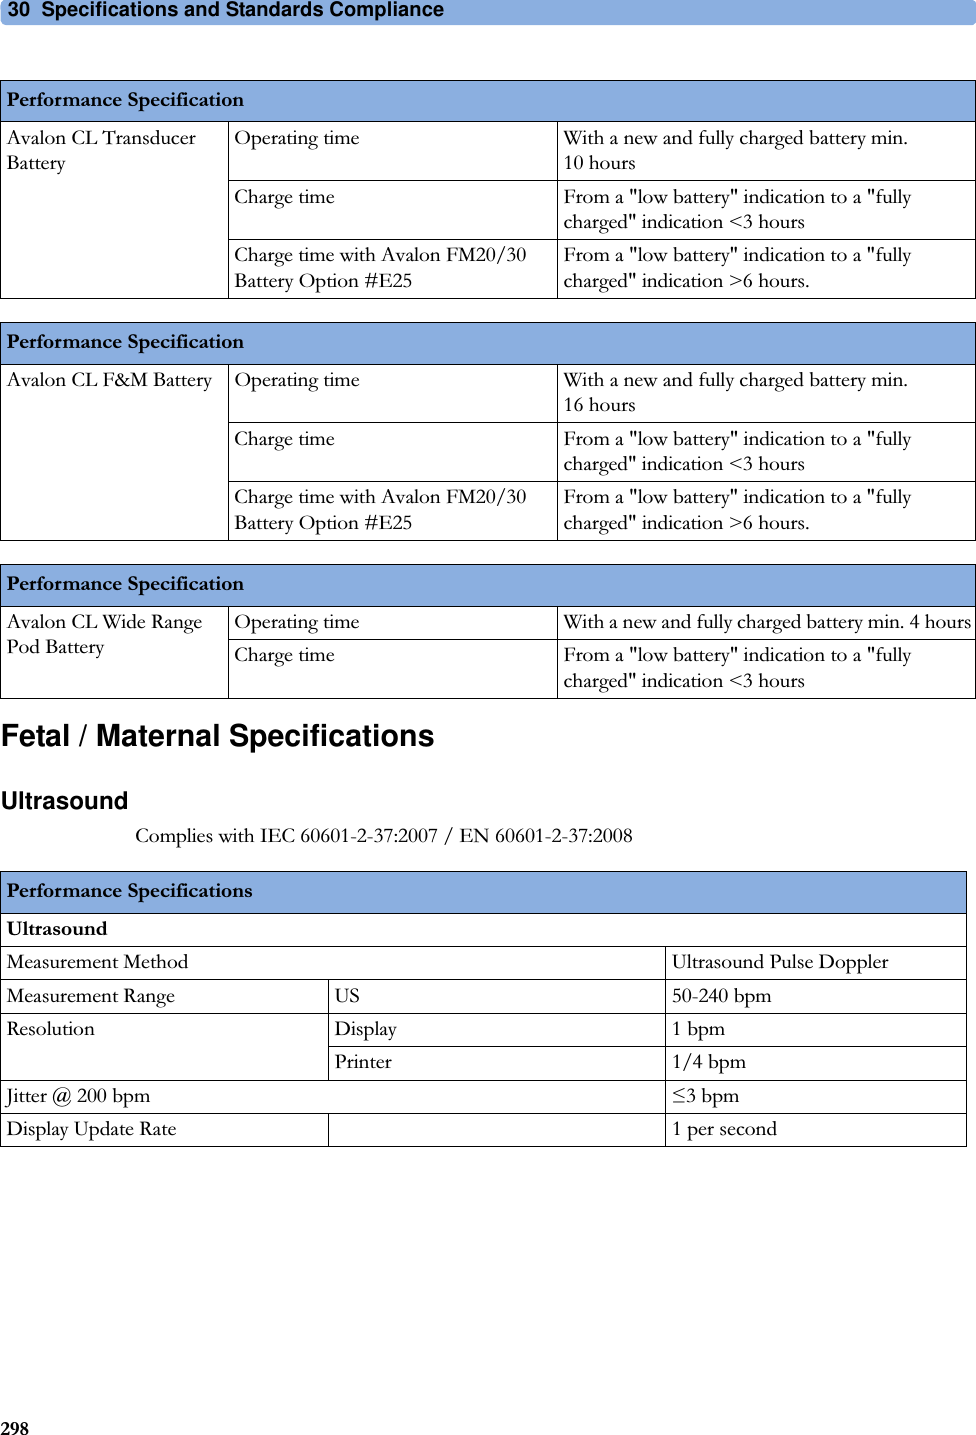 30  Specifications and Standards Compliance298Fetal / Maternal SpecificationsUltrasoundComplies with IEC 60601-2-37:2007 / EN 60601-2-37:2008Performance SpecificationAvalon CL Transducer BatteryOperating time With a new and fully charged battery min. 10 hoursCharge time From a &quot;low battery&quot; indication to a &quot;fully charged&quot; indication &lt;3 hoursCharge time with Avalon FM20/30 Battery Option #E25From a &quot;low battery&quot; indication to a &quot;fully charged&quot; indication &gt;6 hours.Performance SpecificationAvalon CL F&amp;M Battery Operating time With a new and fully charged battery min. 16 hoursCharge time From a &quot;low battery&quot; indication to a &quot;fully charged&quot; indication &lt;3 hoursCharge time with Avalon FM20/30 Battery Option #E25From a &quot;low battery&quot; indication to a &quot;fully charged&quot; indication &gt;6 hours.Performance SpecificationAvalon CL Wide Range Pod BatteryOperating time With a new and fully charged battery min. 4 hoursCharge time From a &quot;low battery&quot; indication to a &quot;fully charged&quot; indication &lt;3 hoursPerformance SpecificationsUltrasoundMeasurement Method Ultrasound Pulse DopplerMeasurement Range US 50-240 bpmResolution Display 1 bpmPrinter 1/4 bpmJitter @ 200 bpm 3 bpmDisplay Update Rate 1 per second